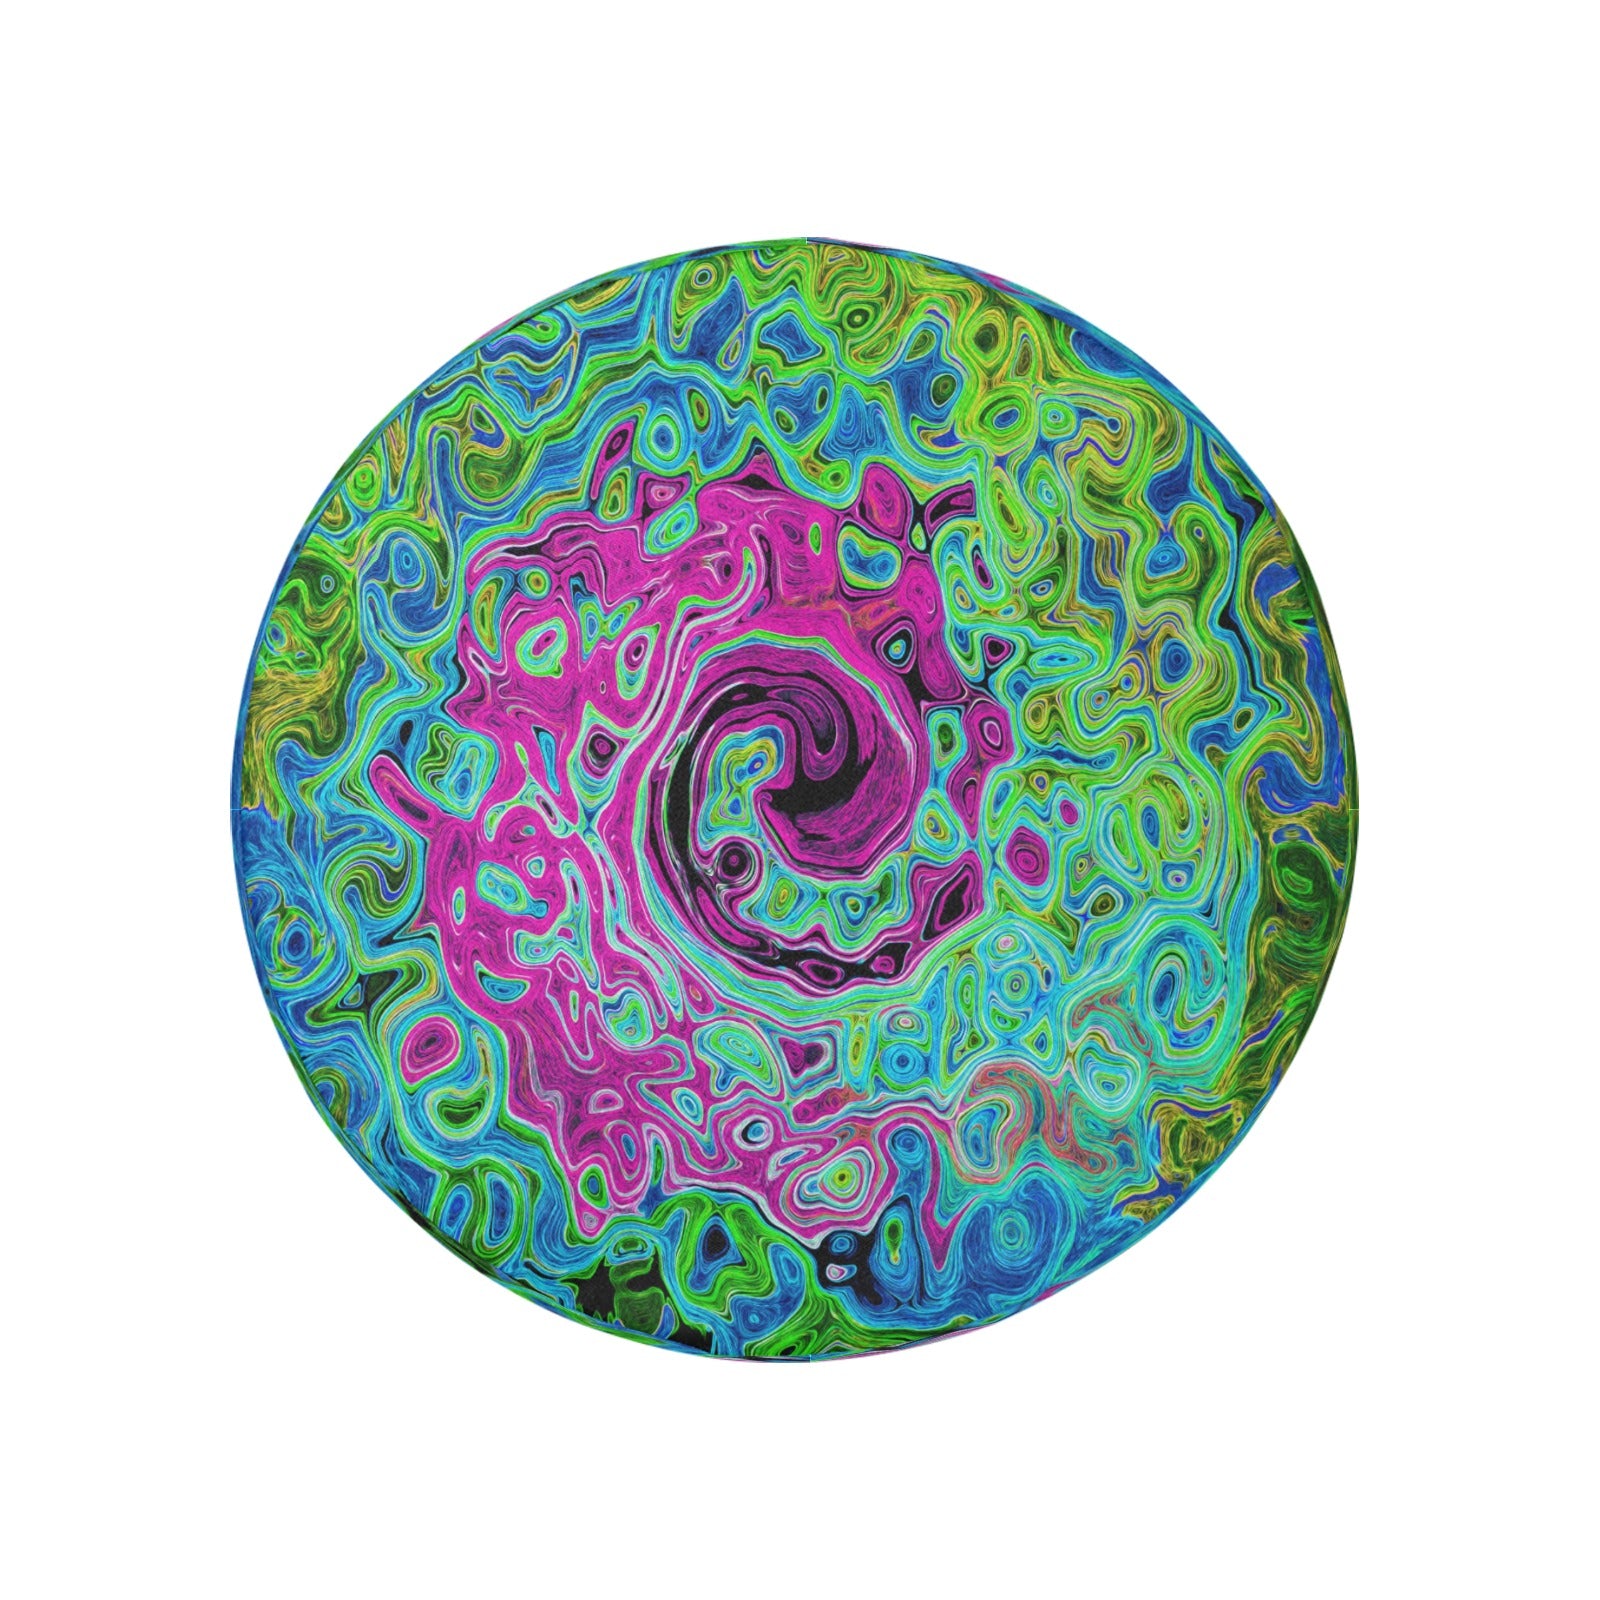 Spare Tire Covers, Hot Pink and Blue Groovy Abstract Retro Liquid Swirl - Medium